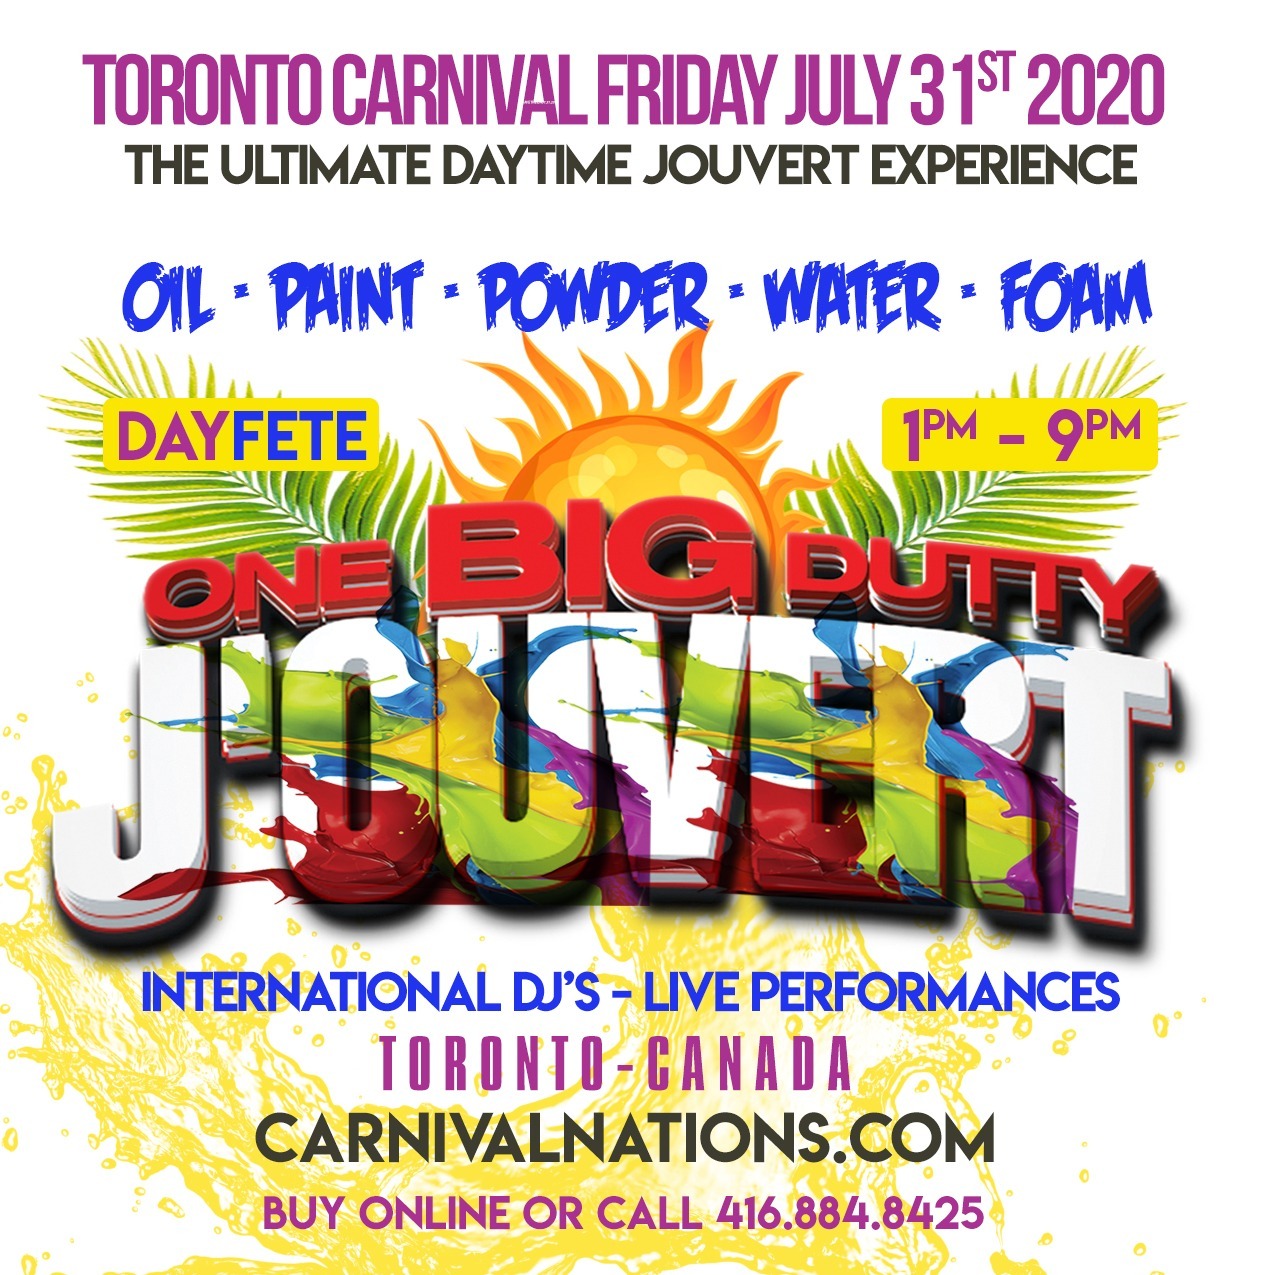 One Big Dutty J'ouvert 2020